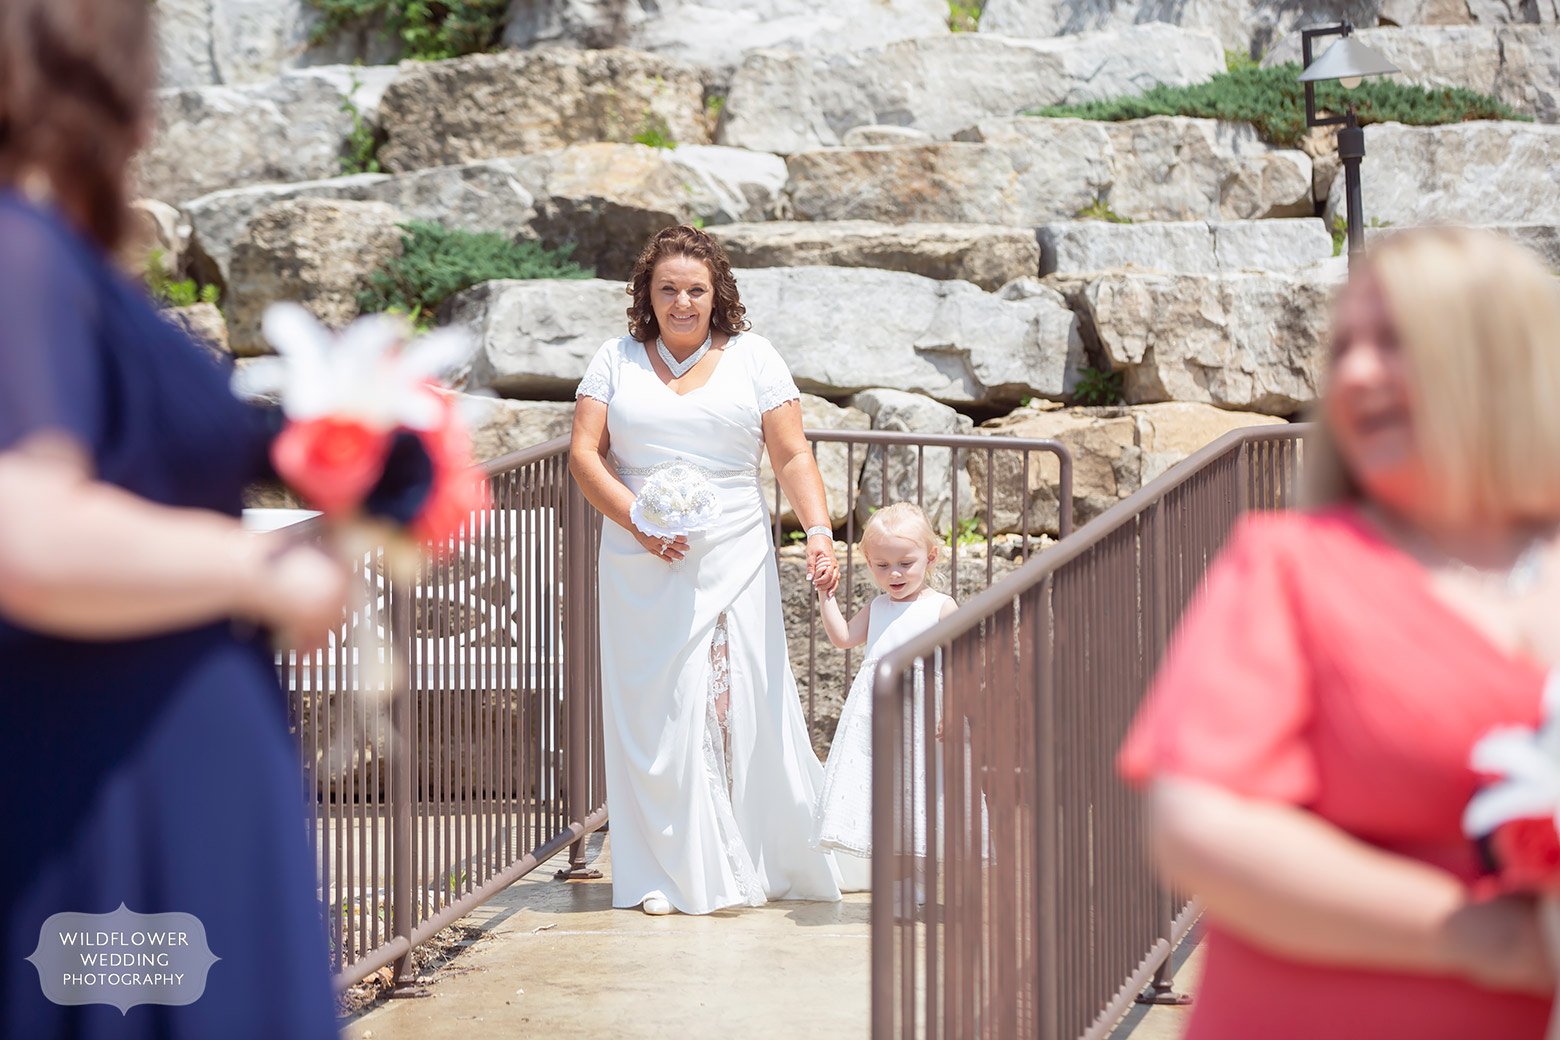 Bride enters ceremony at Hermann Hill Weddings.